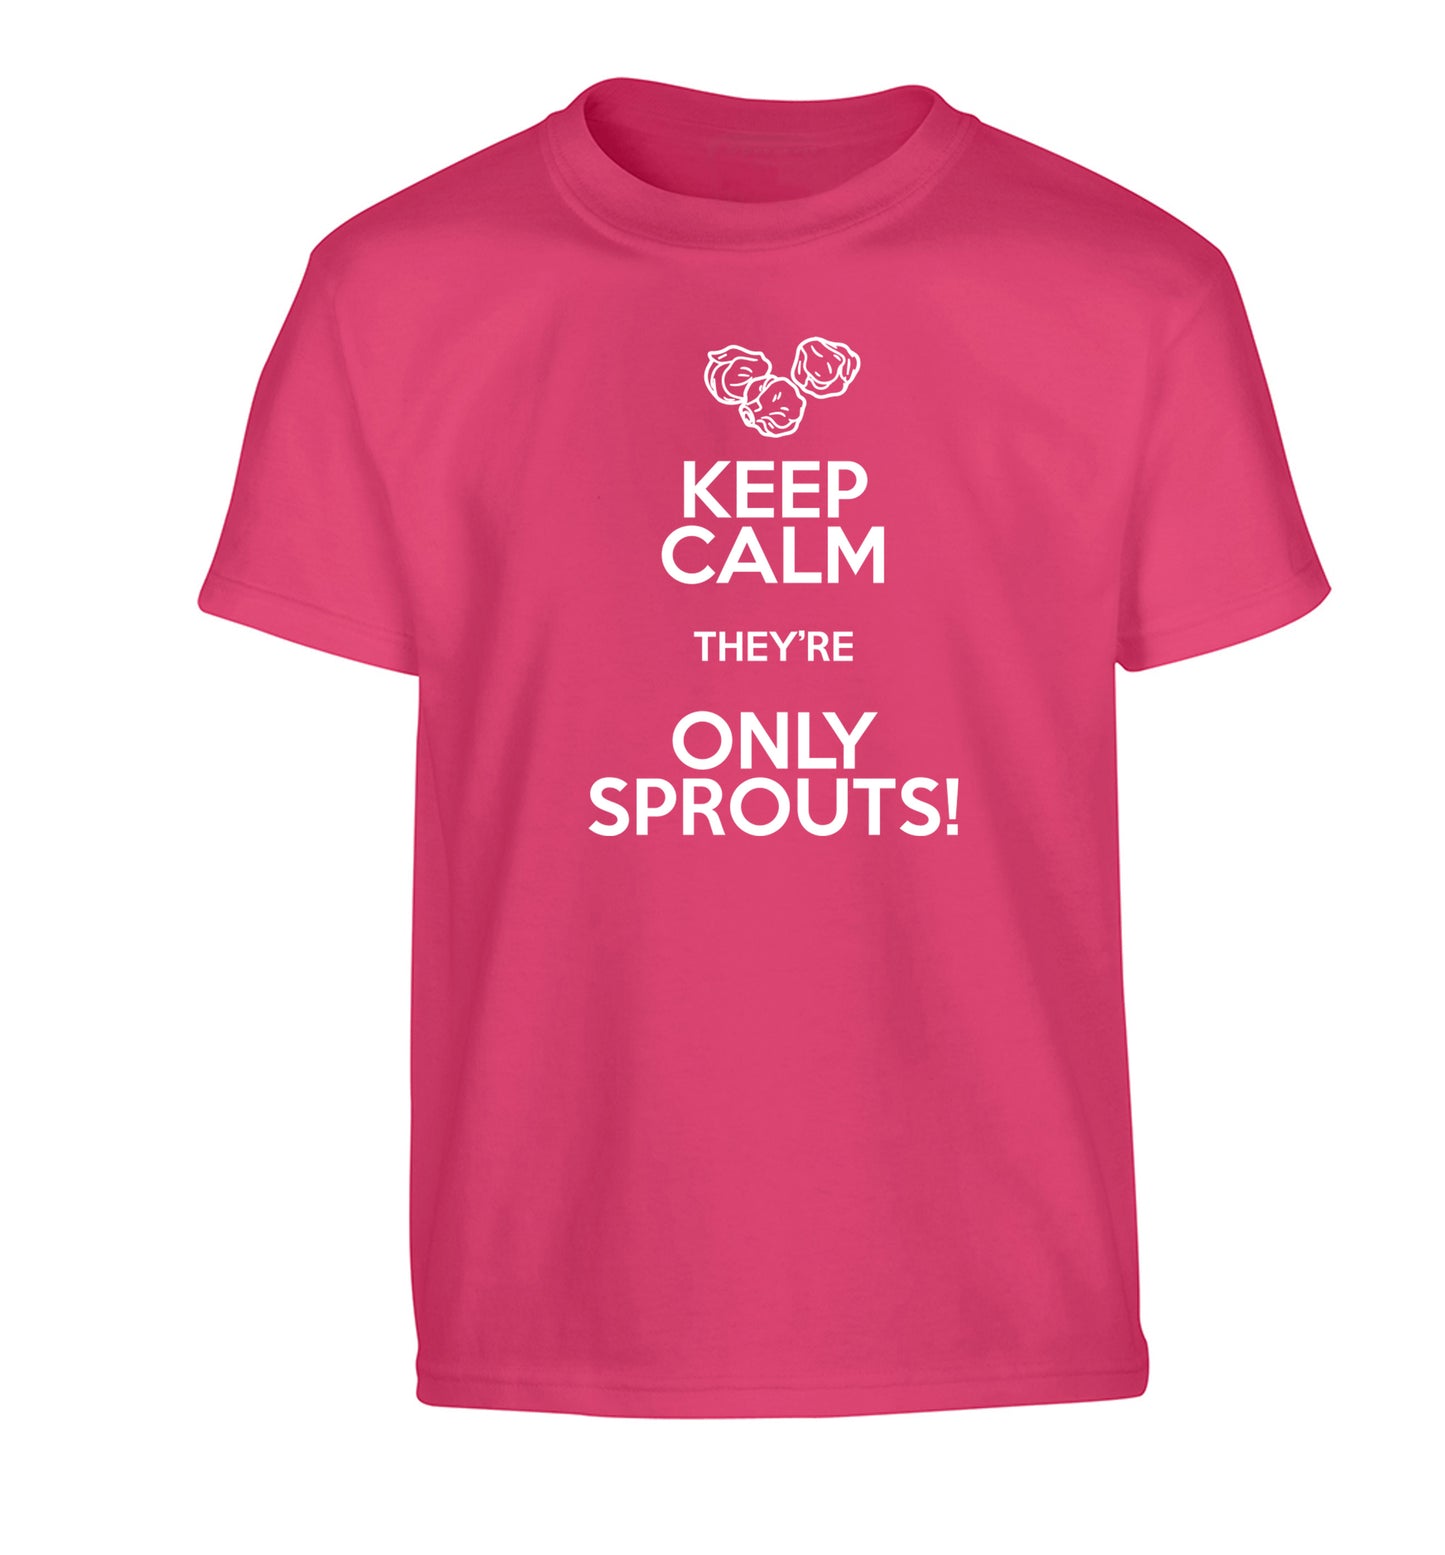 Keep calm they're only sprouts Children's pink Tshirt 12-13 Years